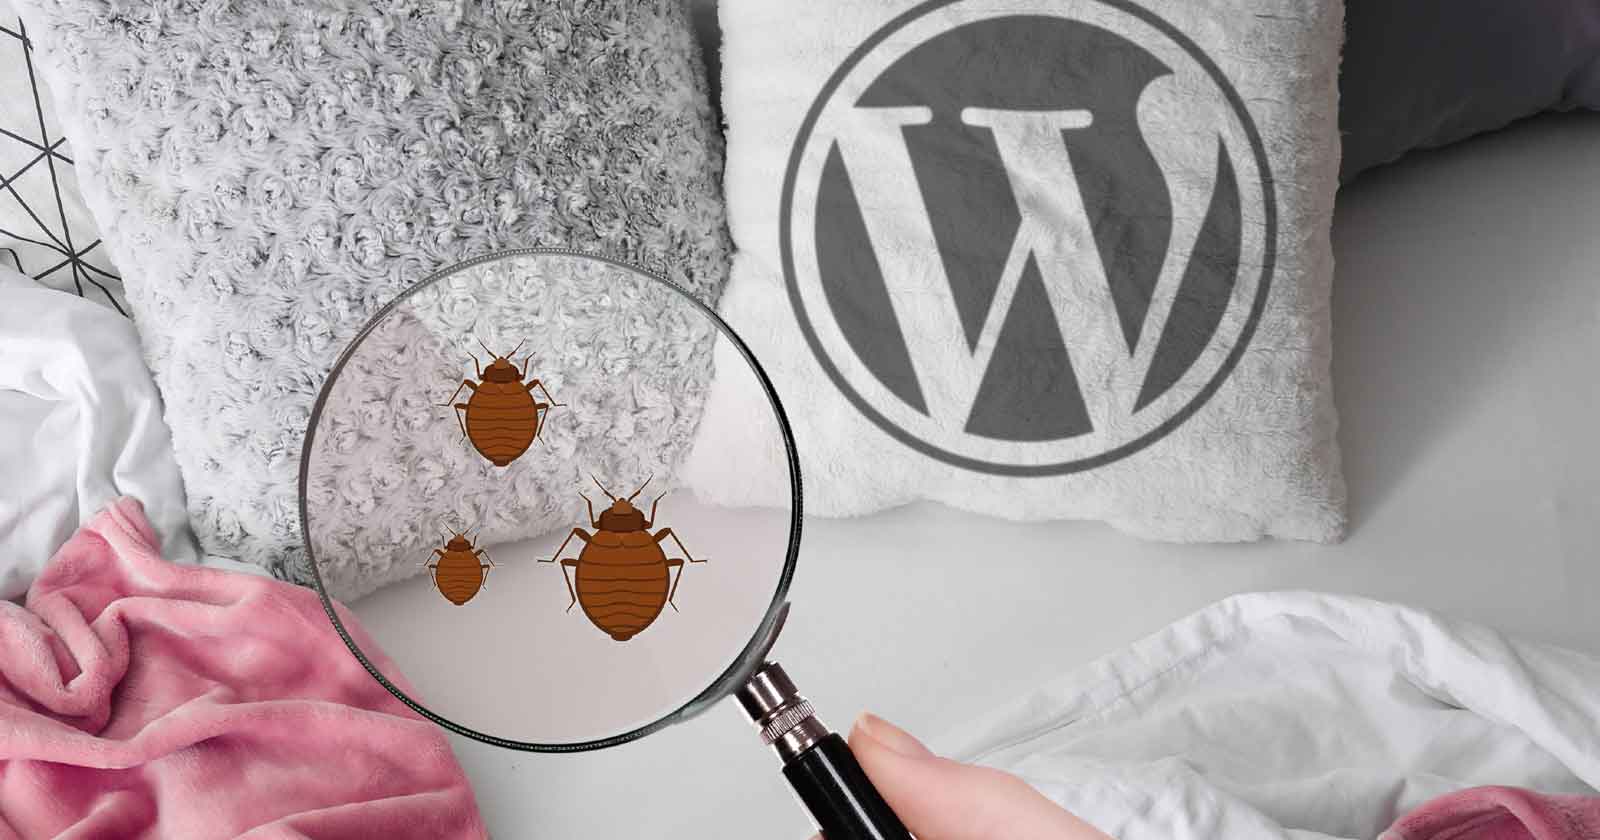 WordPress 5.6.1 Introduces Bug Into Post and Page Windows